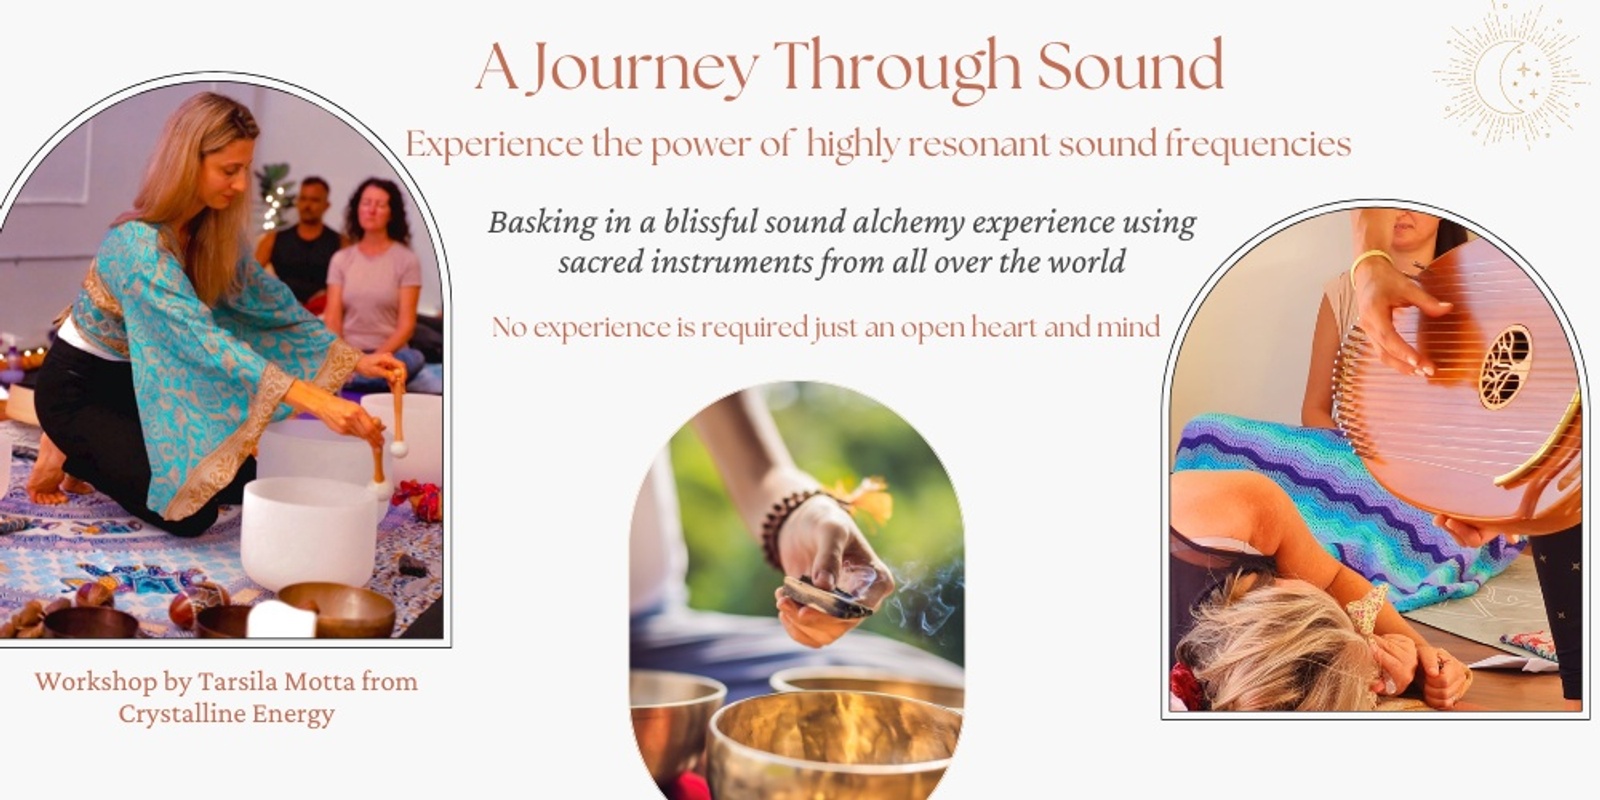 Banner image for A Journey Through Sound - Sunday 2:45 pm Session